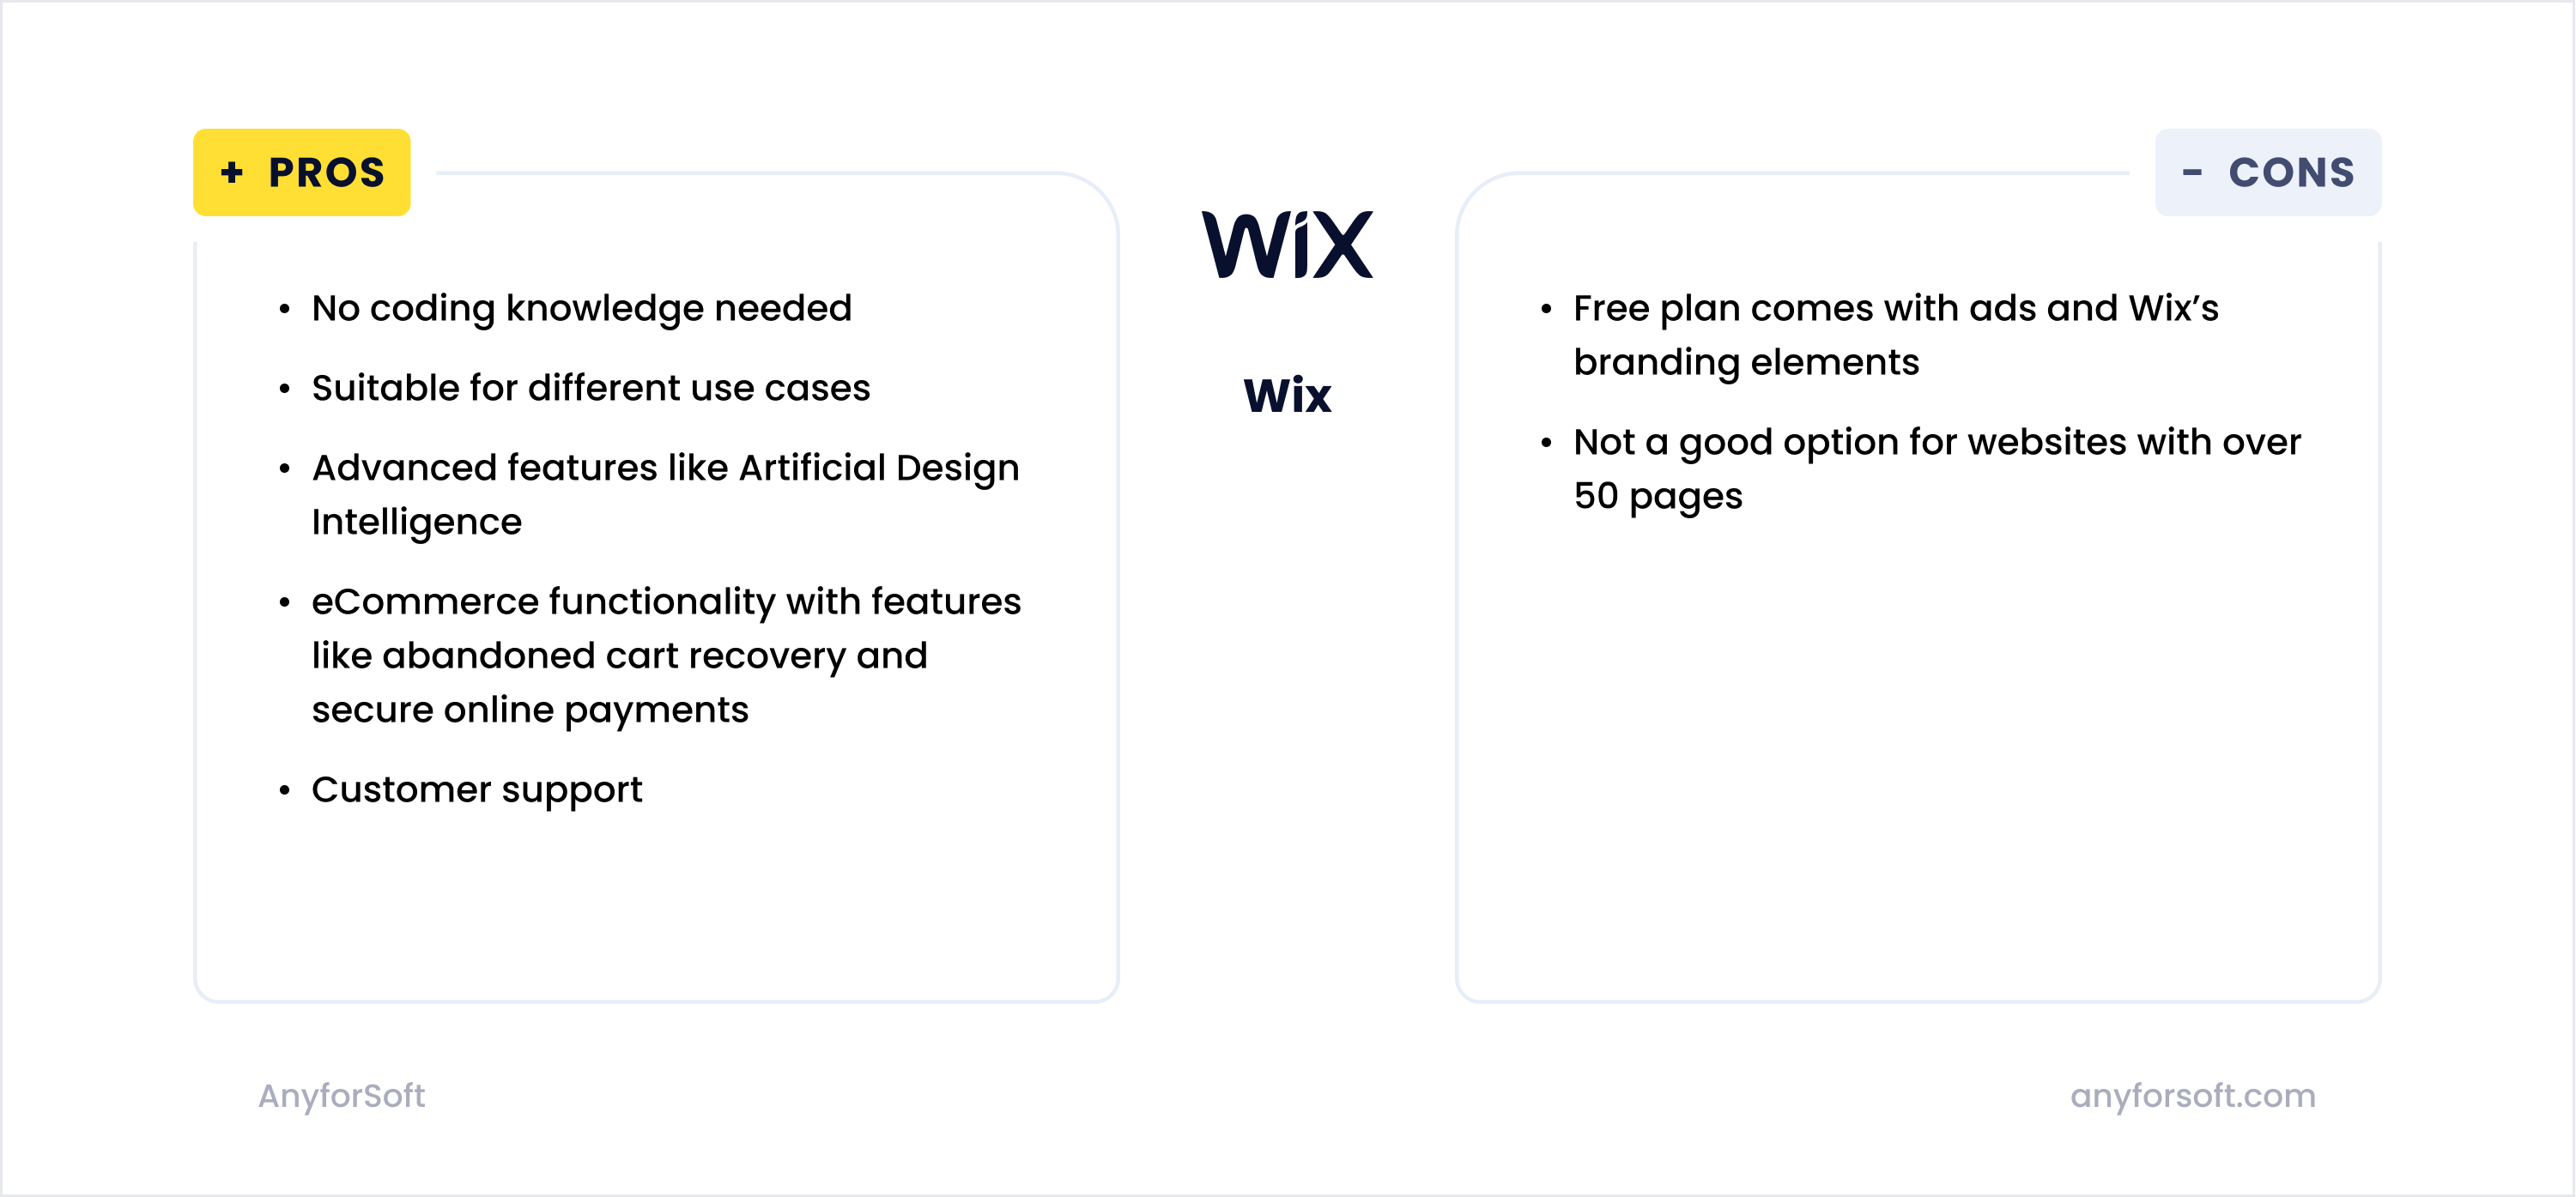 Wix pros and cons